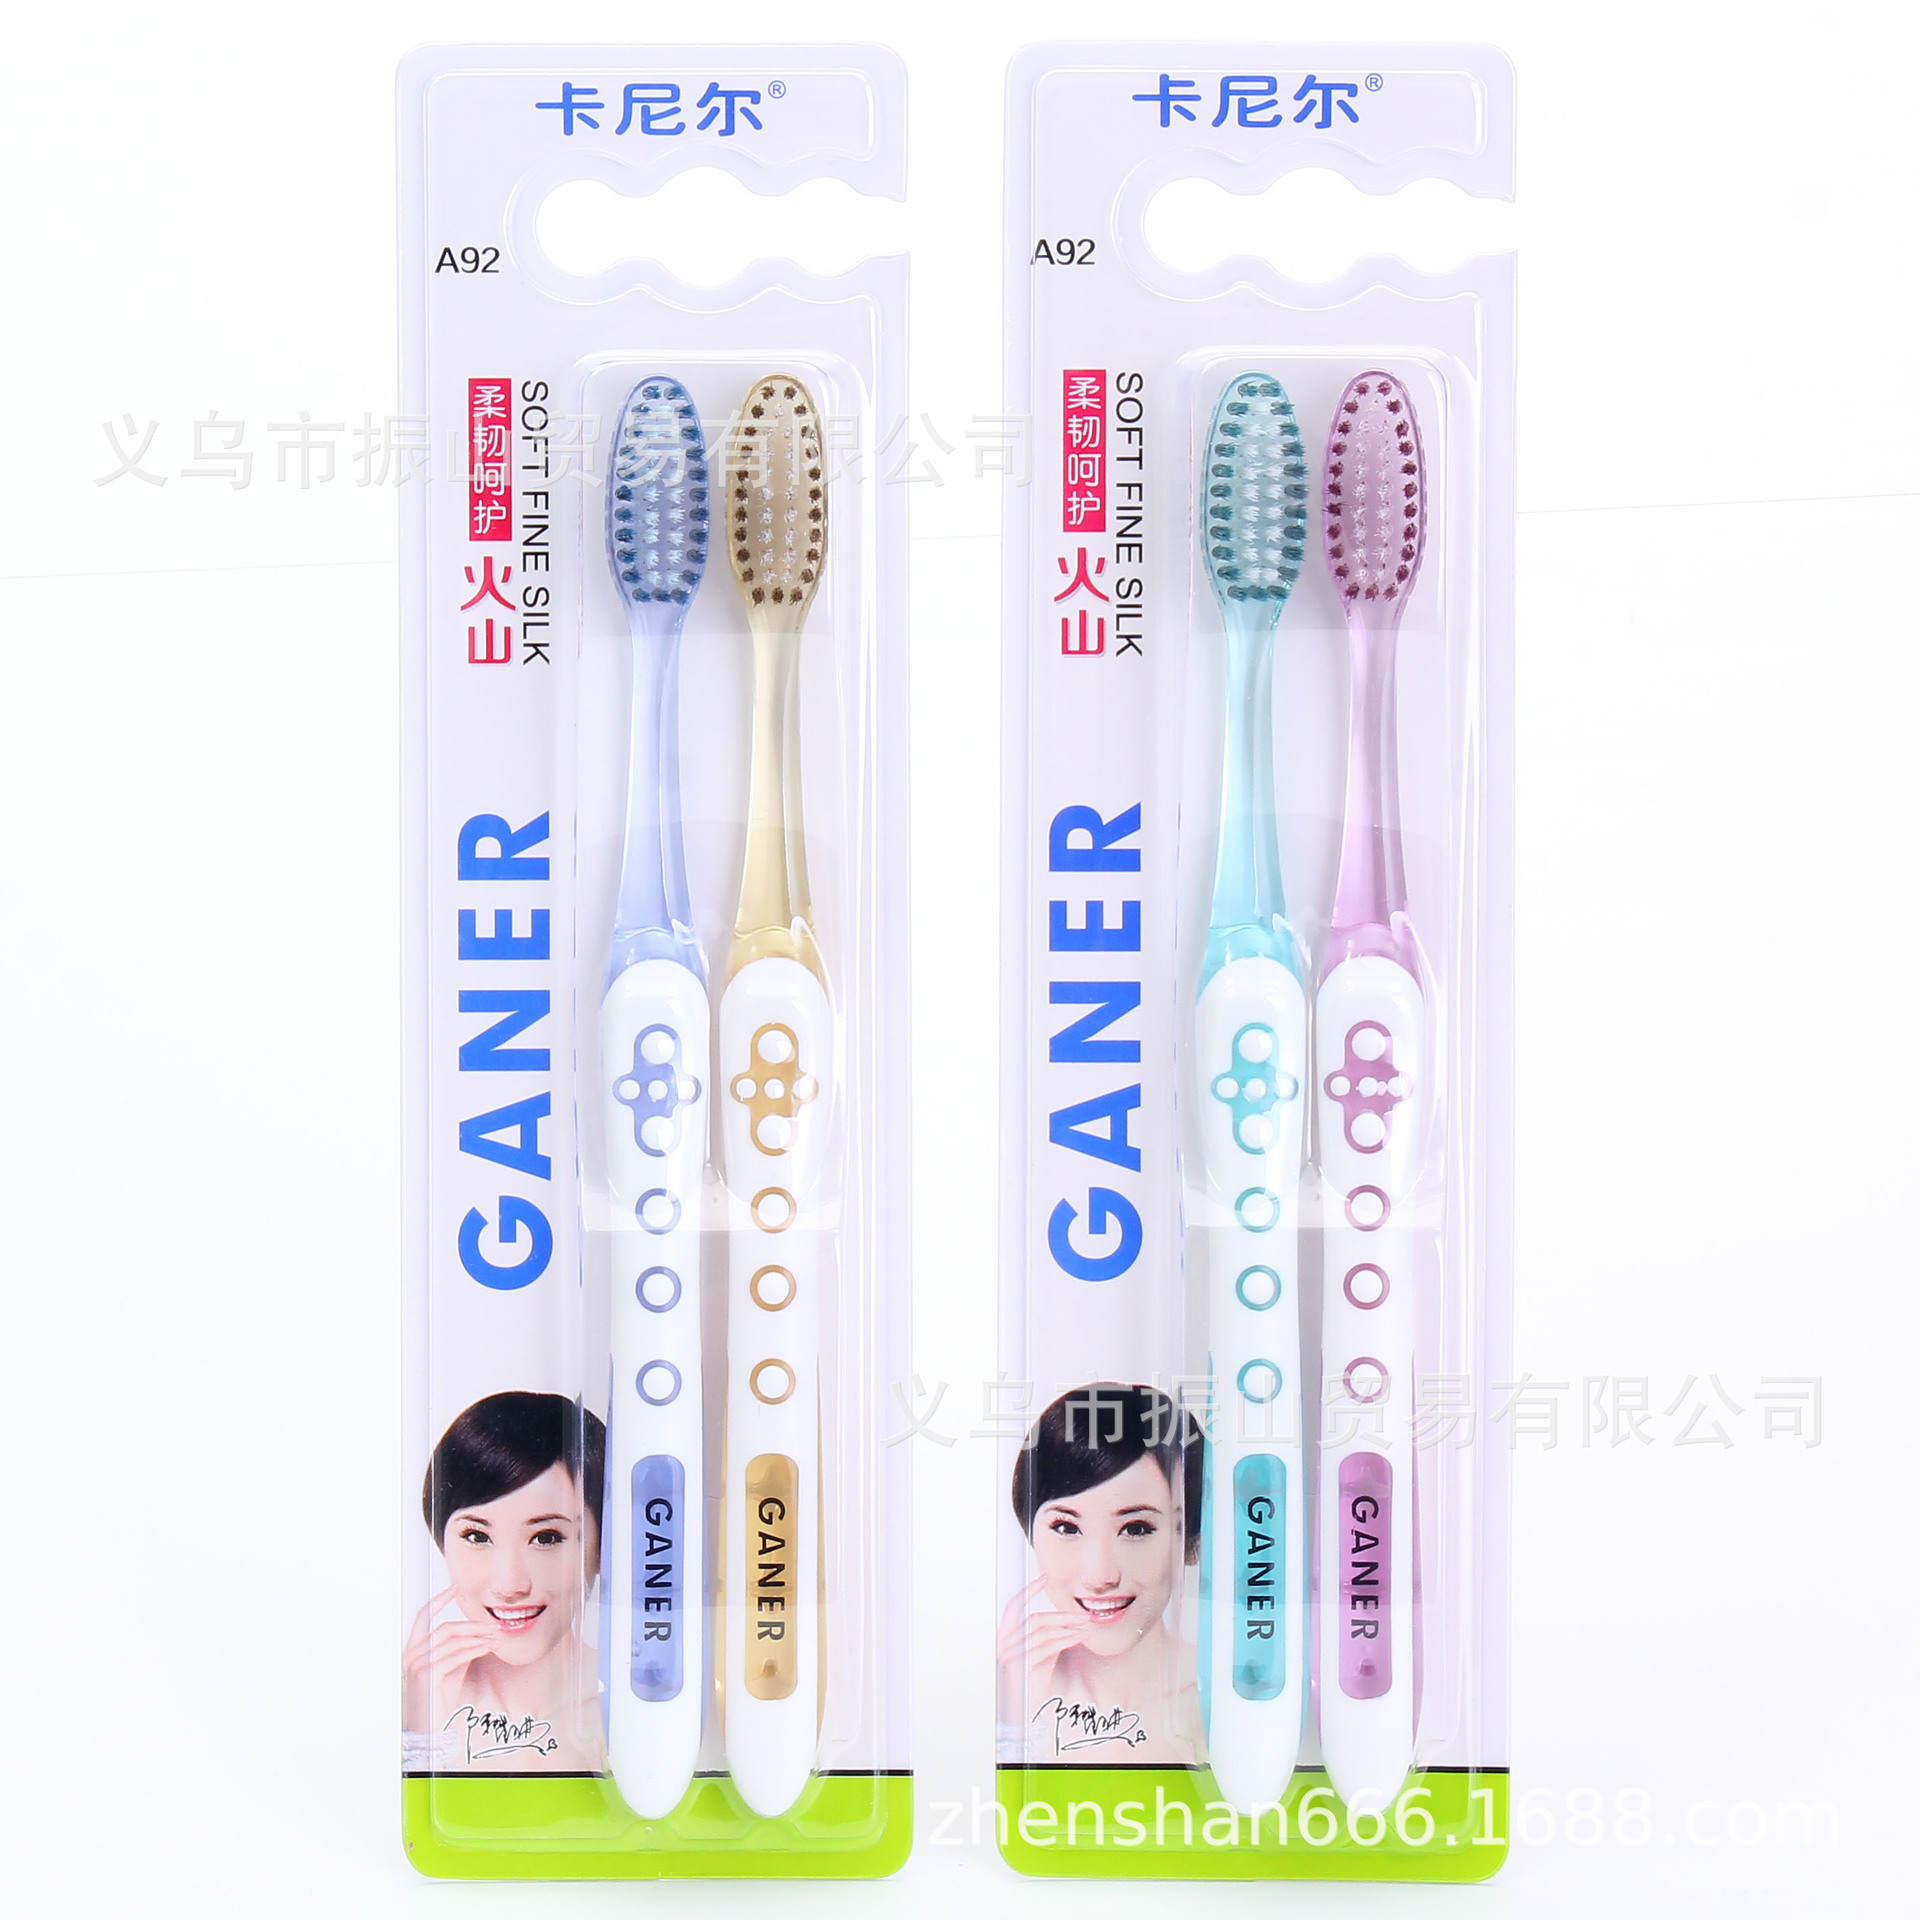 Carnier A92 Luxury Fashion Couple Outfit Multi-Effect Care Bamboo Charcoal Soft Silk Bristle Toothbrush